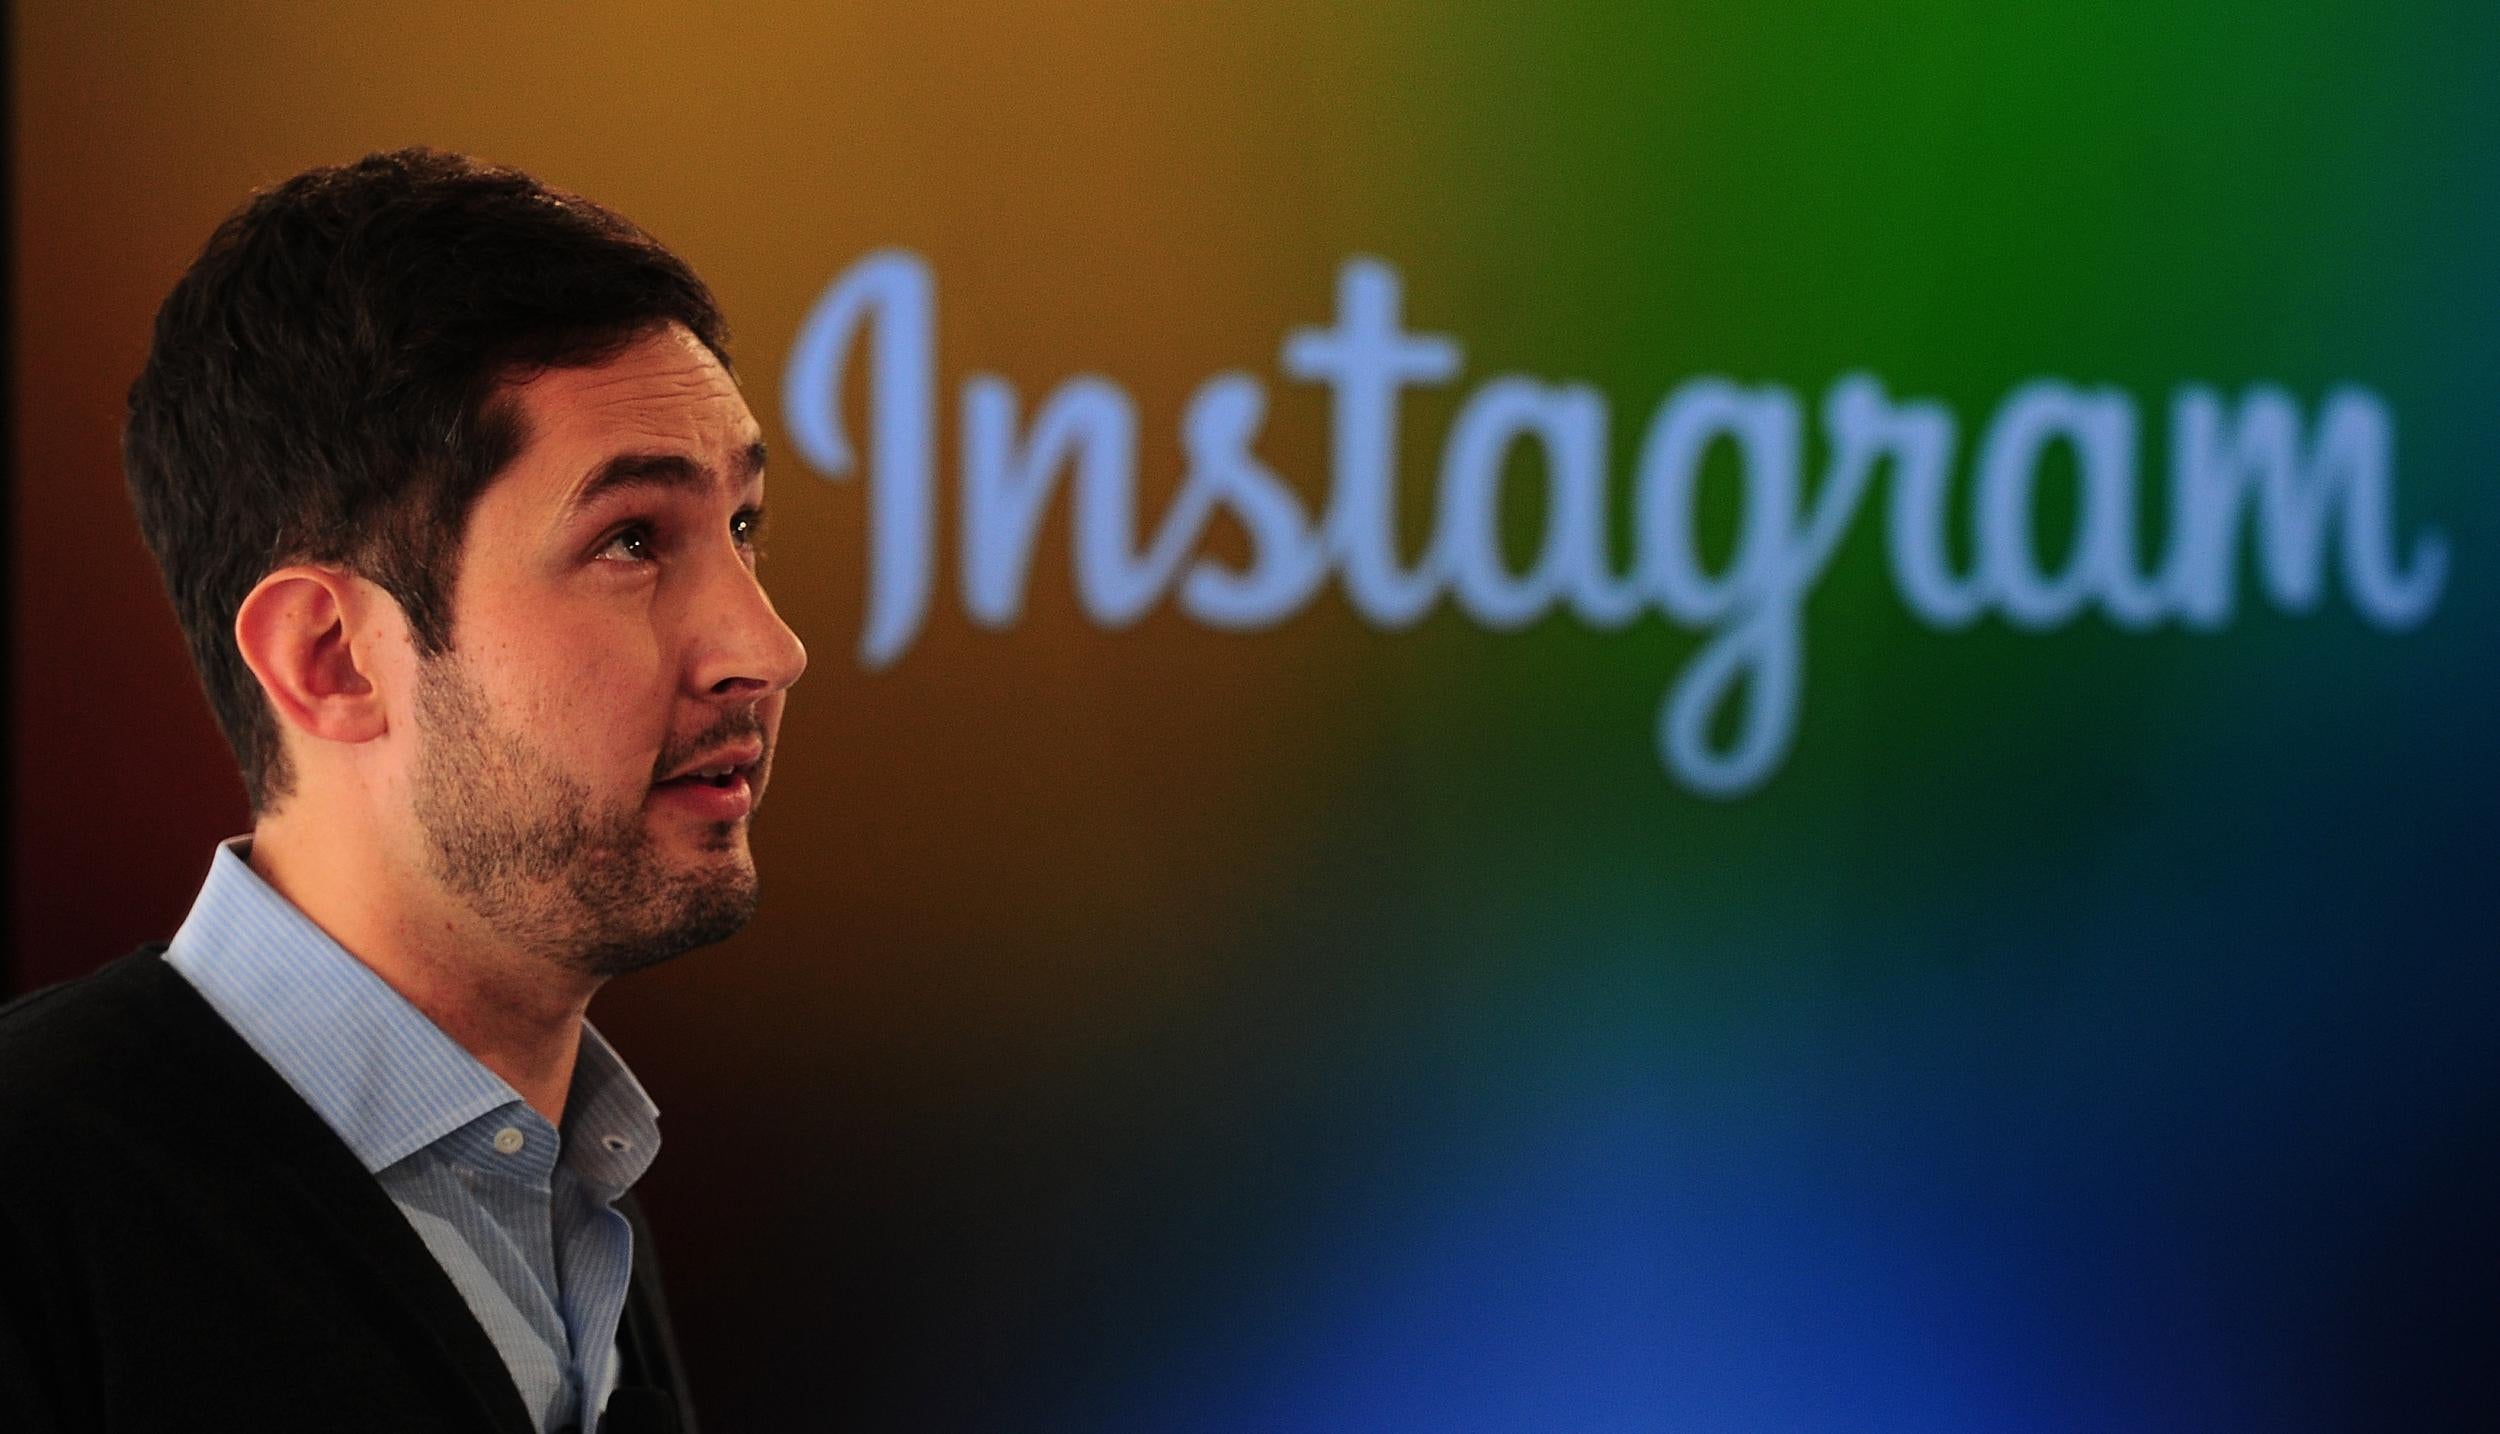 Instagram CEO Kevin Systrom said his company's nudity policy was based on App Store rules